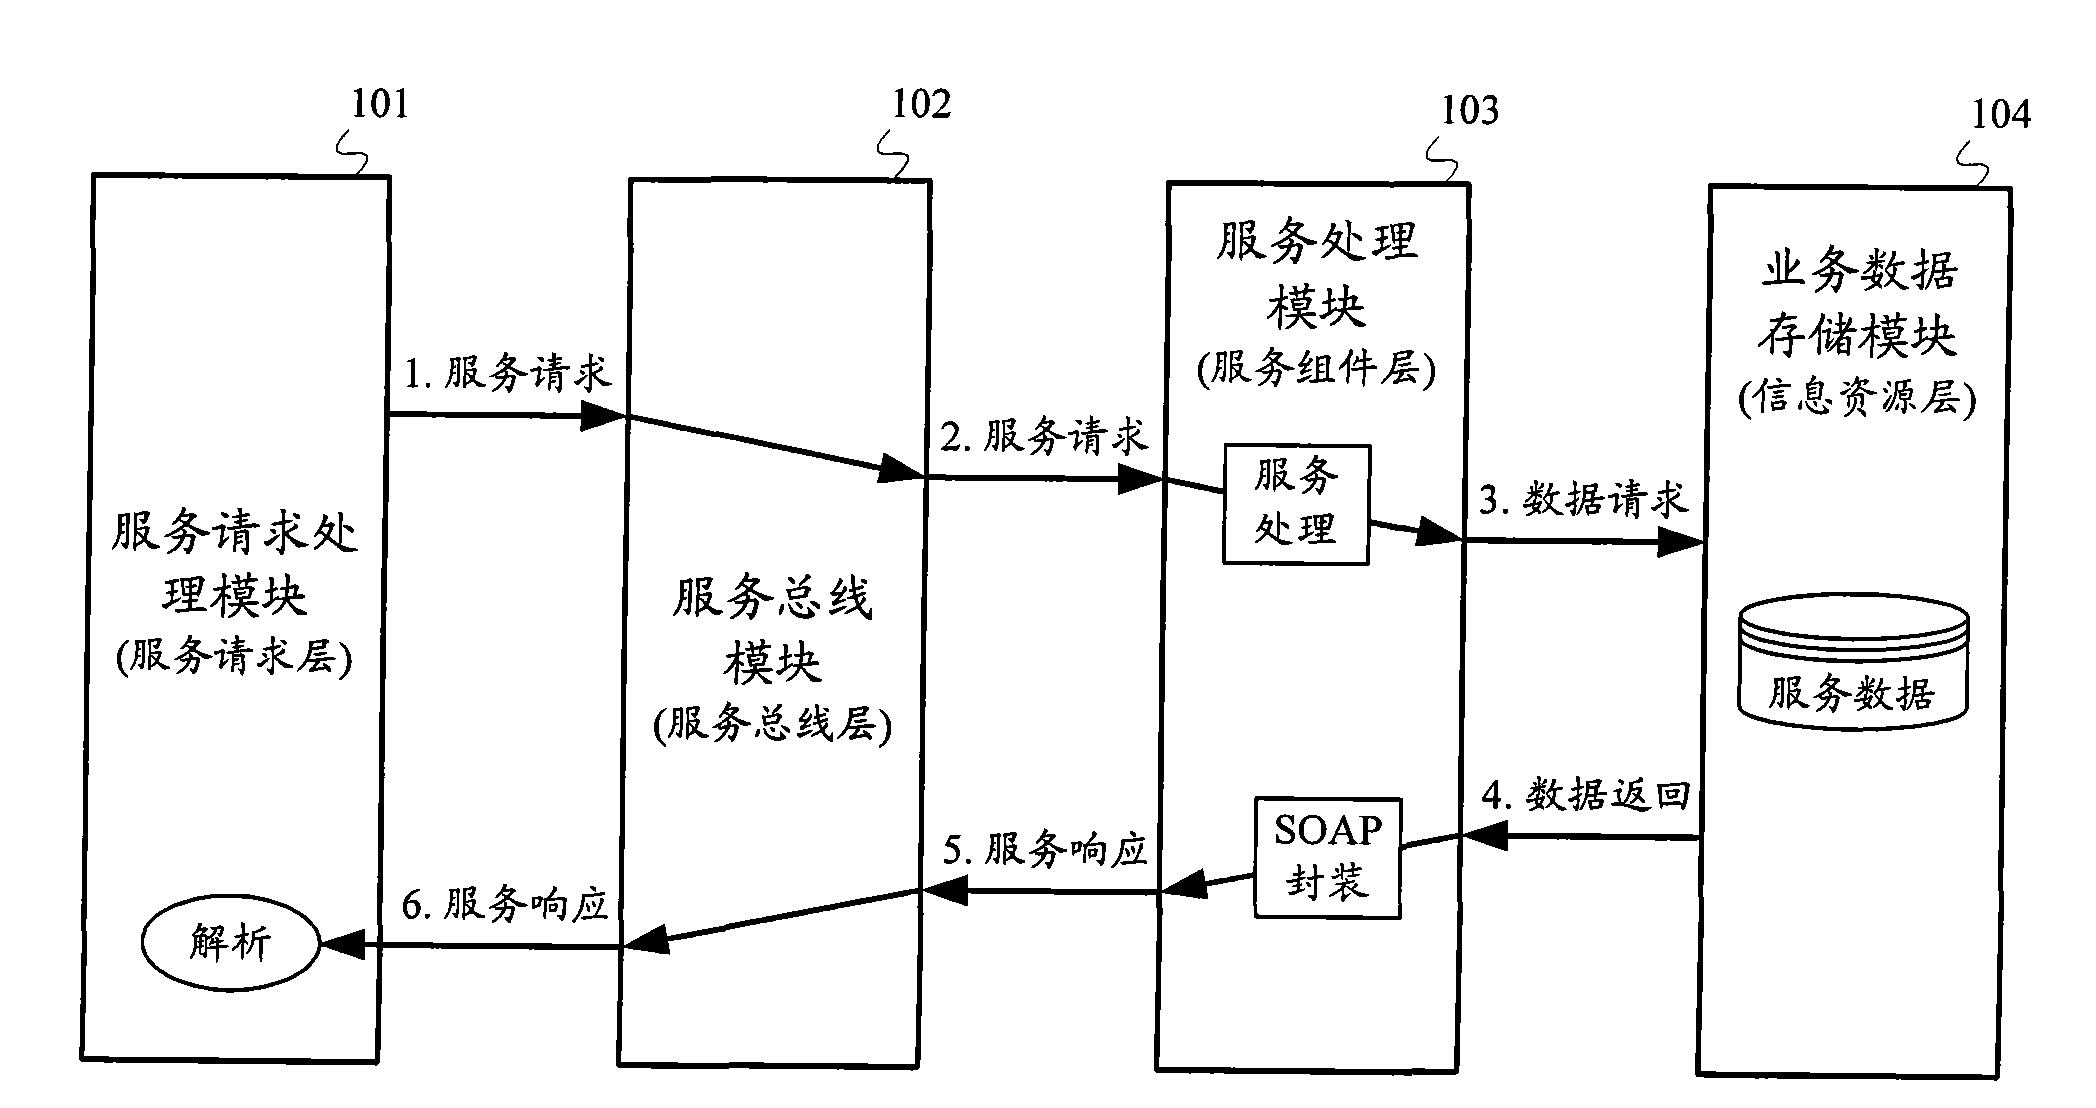 Service processing method and system based on SOA (Service Oriented Architecture)